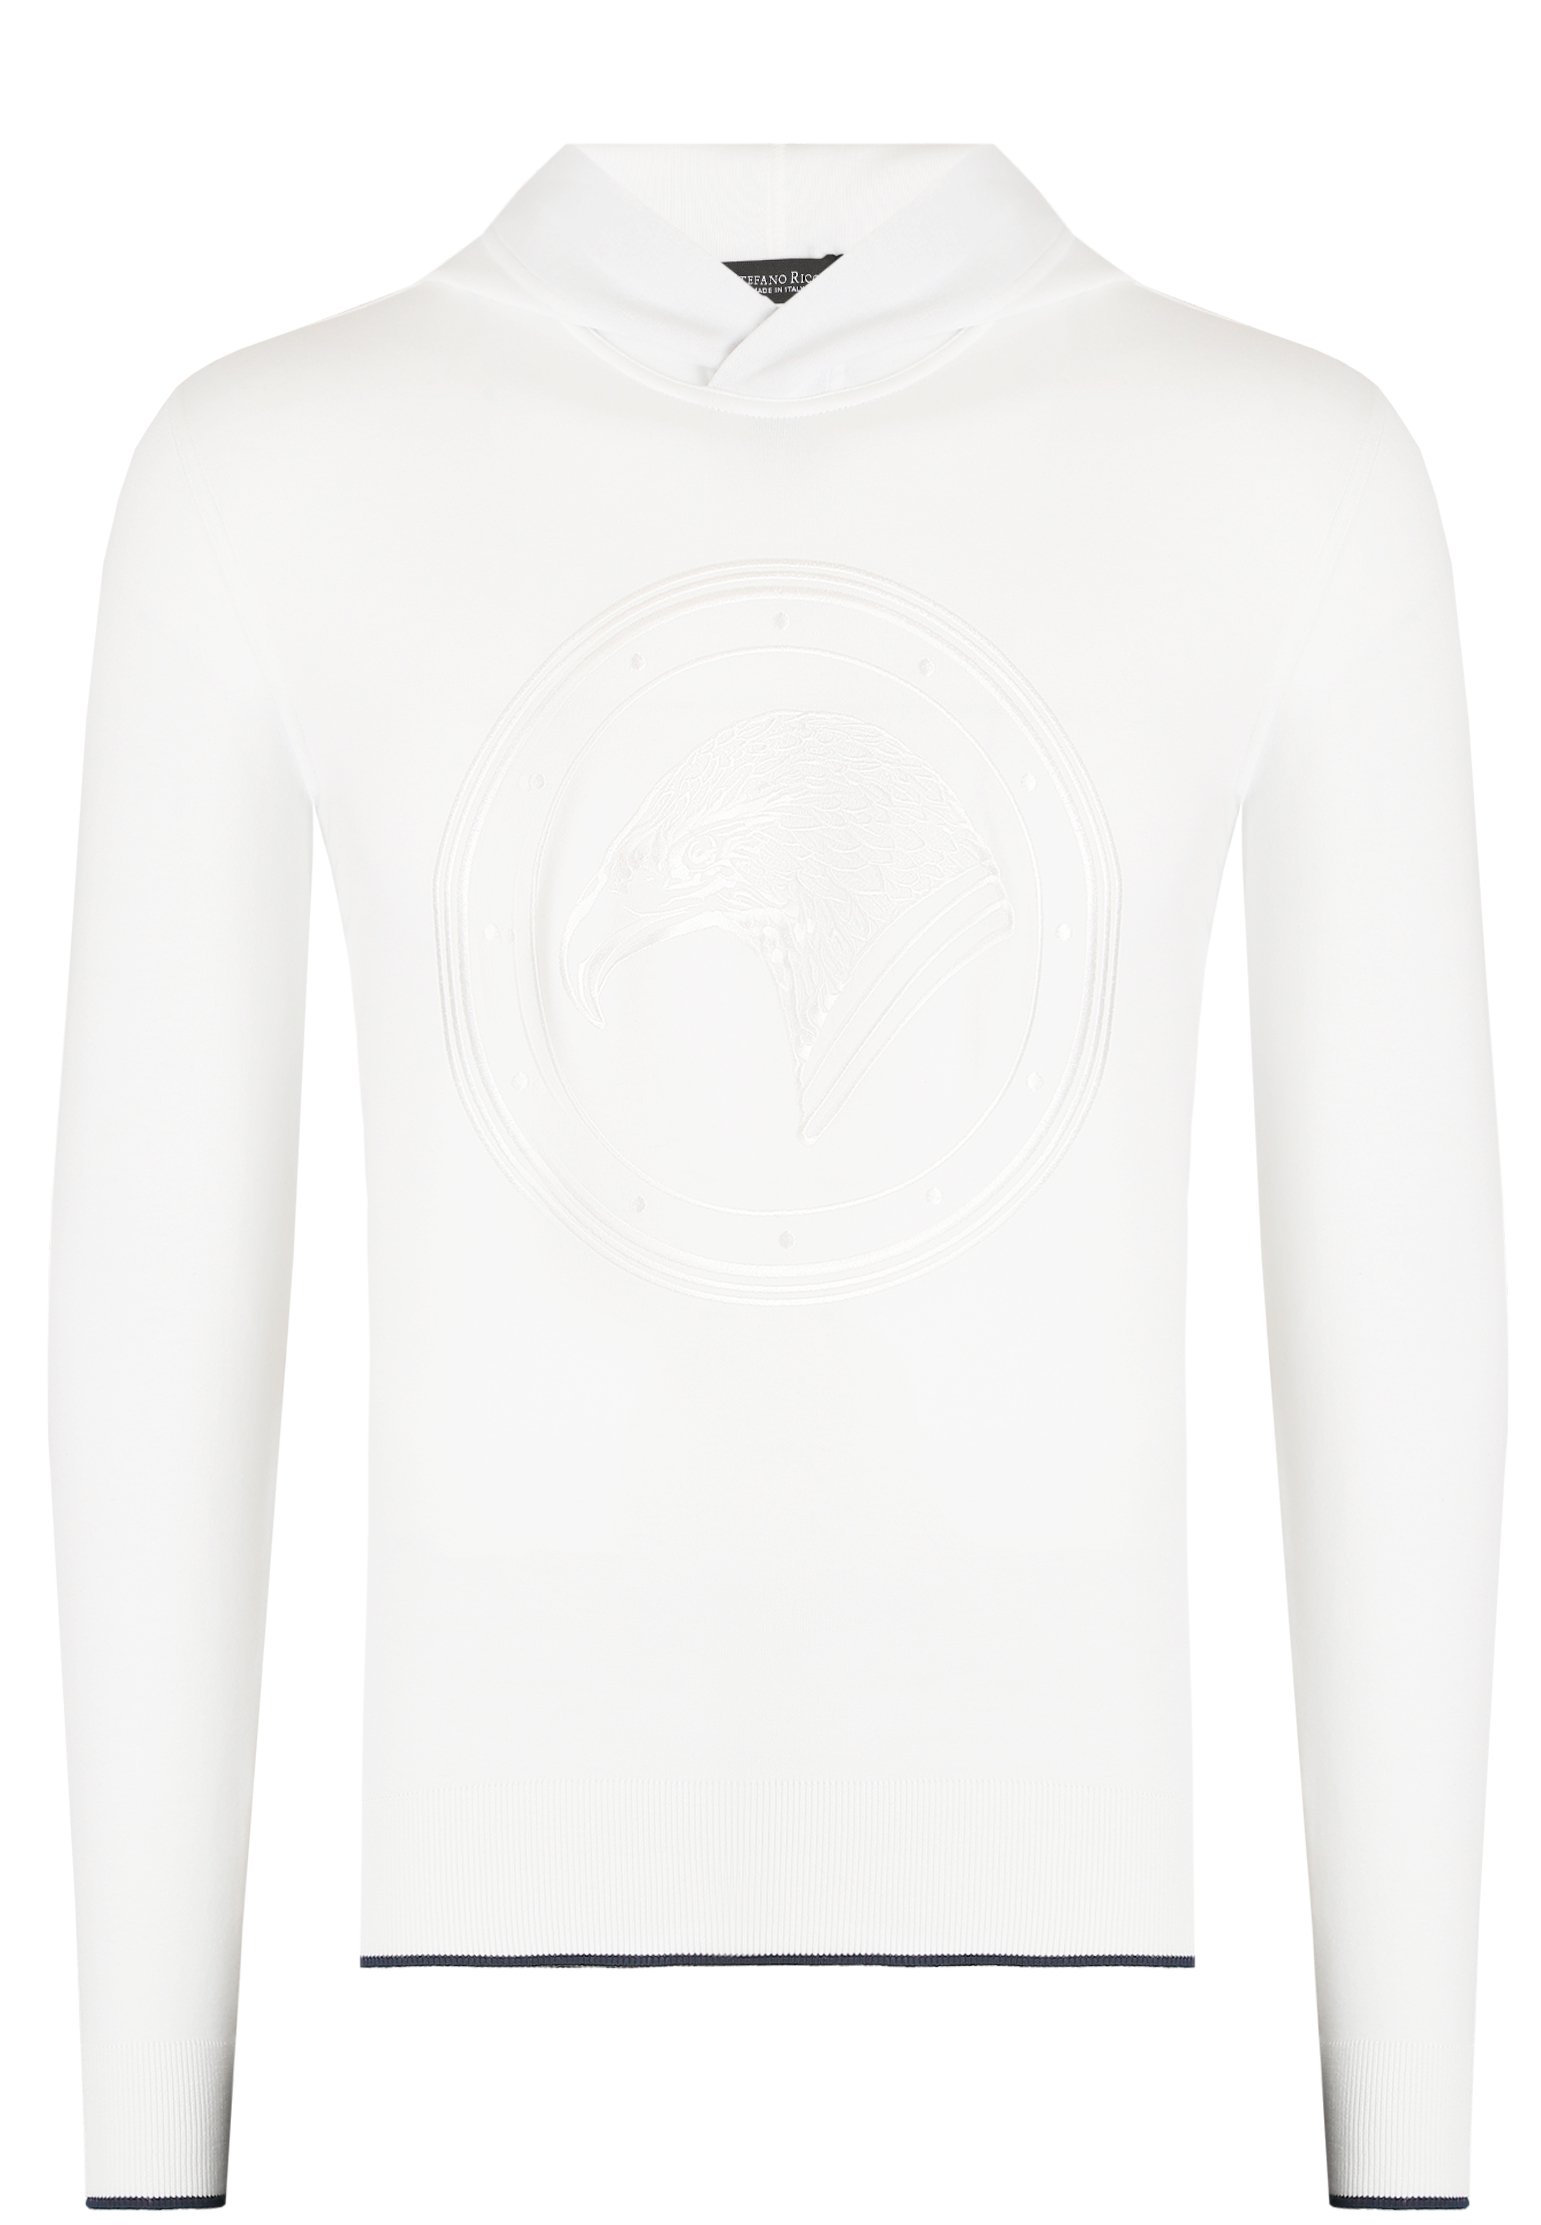 Hoodie STEFANO RICCI Color: white (Code: 390) in online store Allure